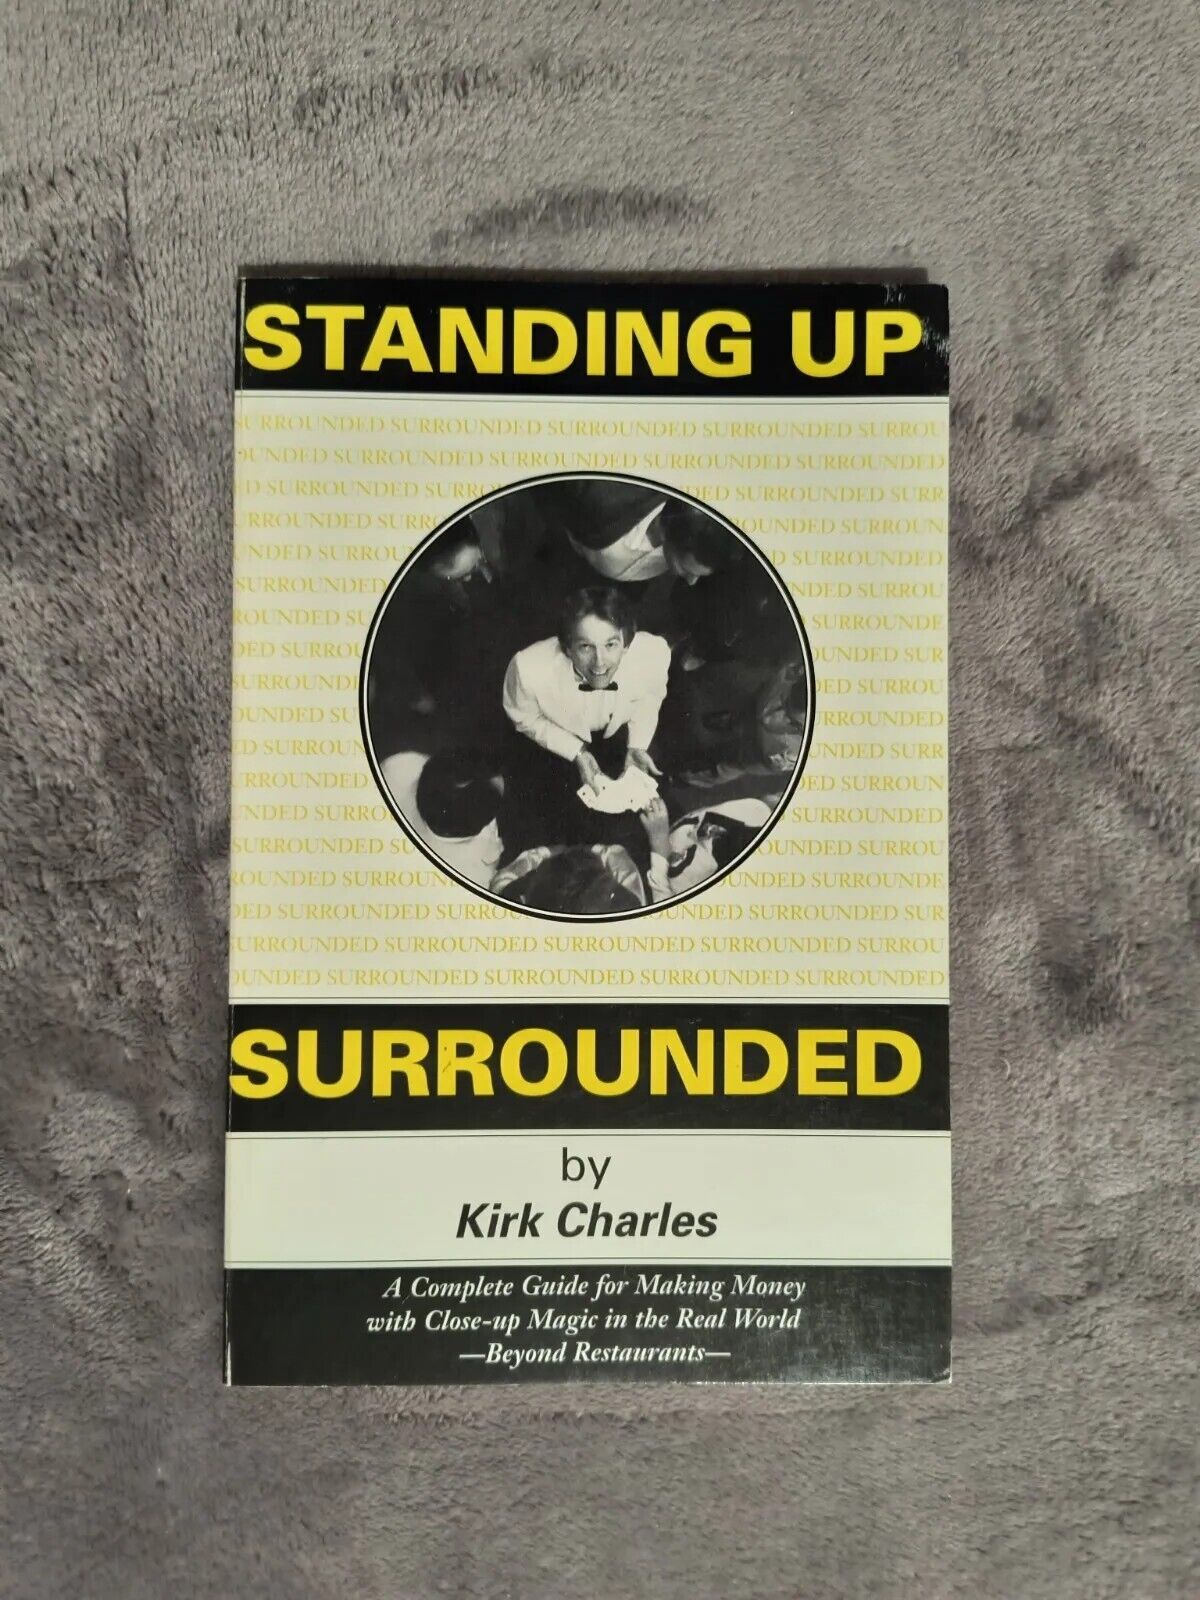 Standing Up Surrounded by Kirk Charles - Paperback Magic Theory Book